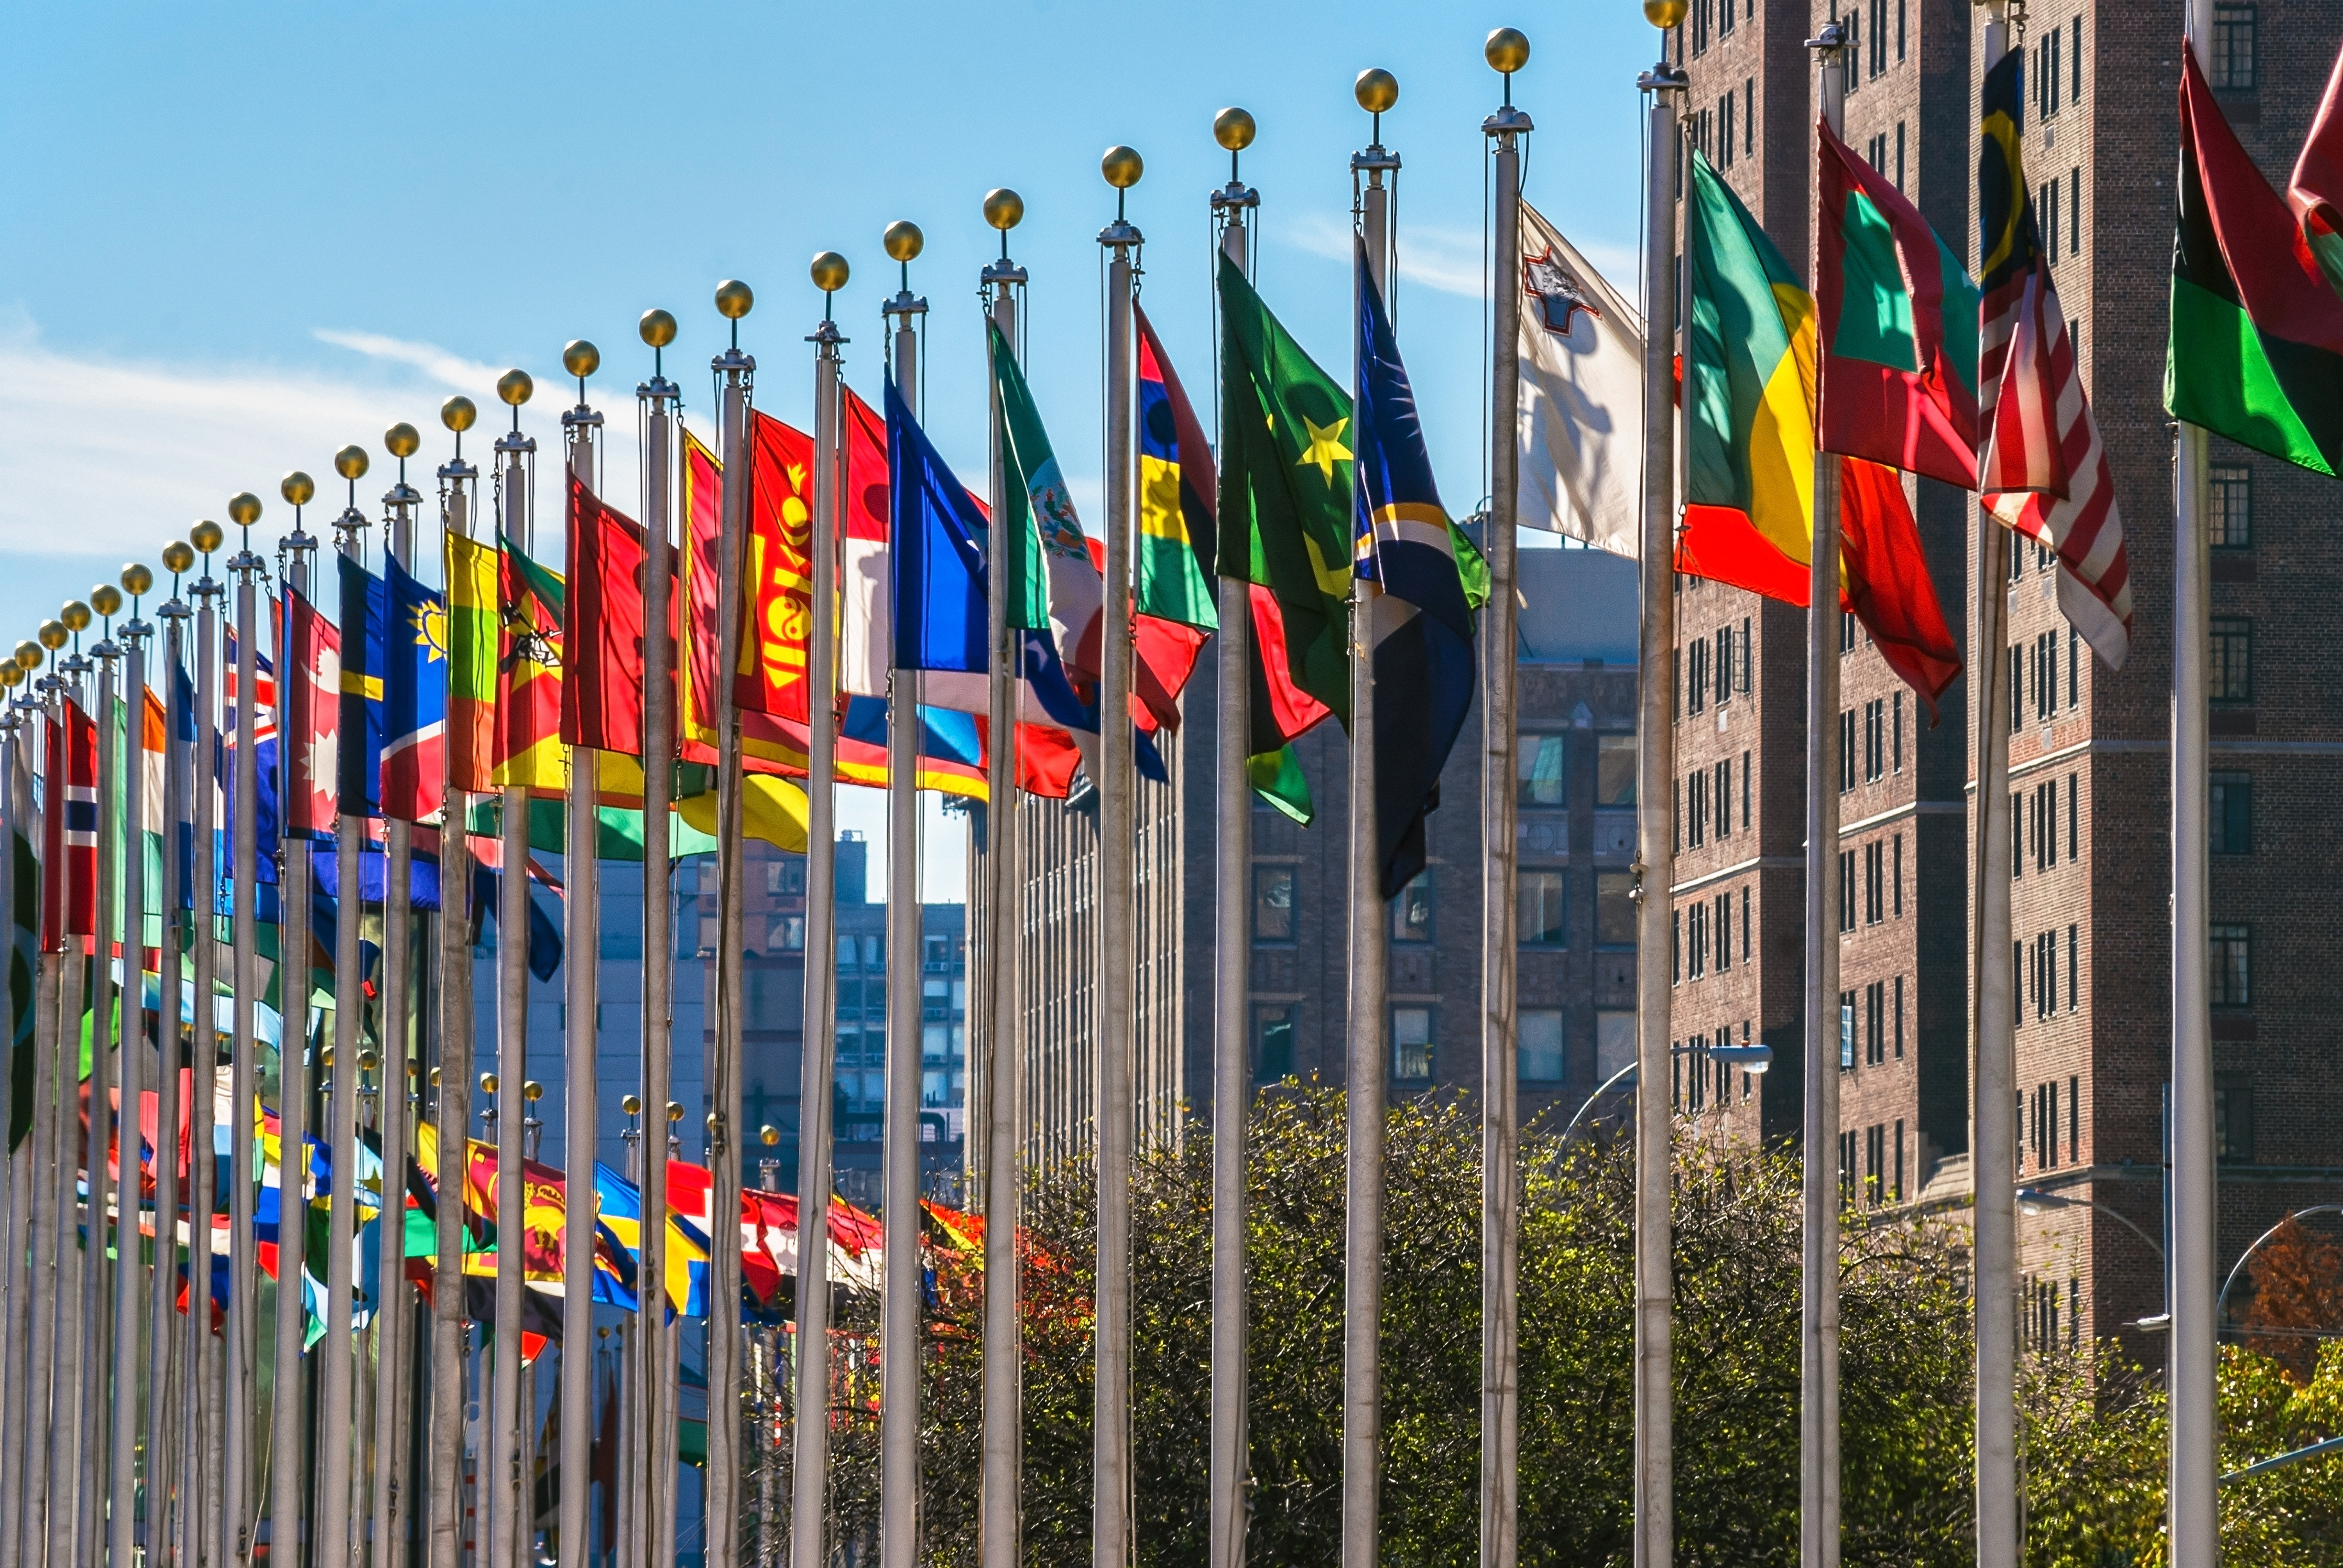 Row of world countries' flags on poles